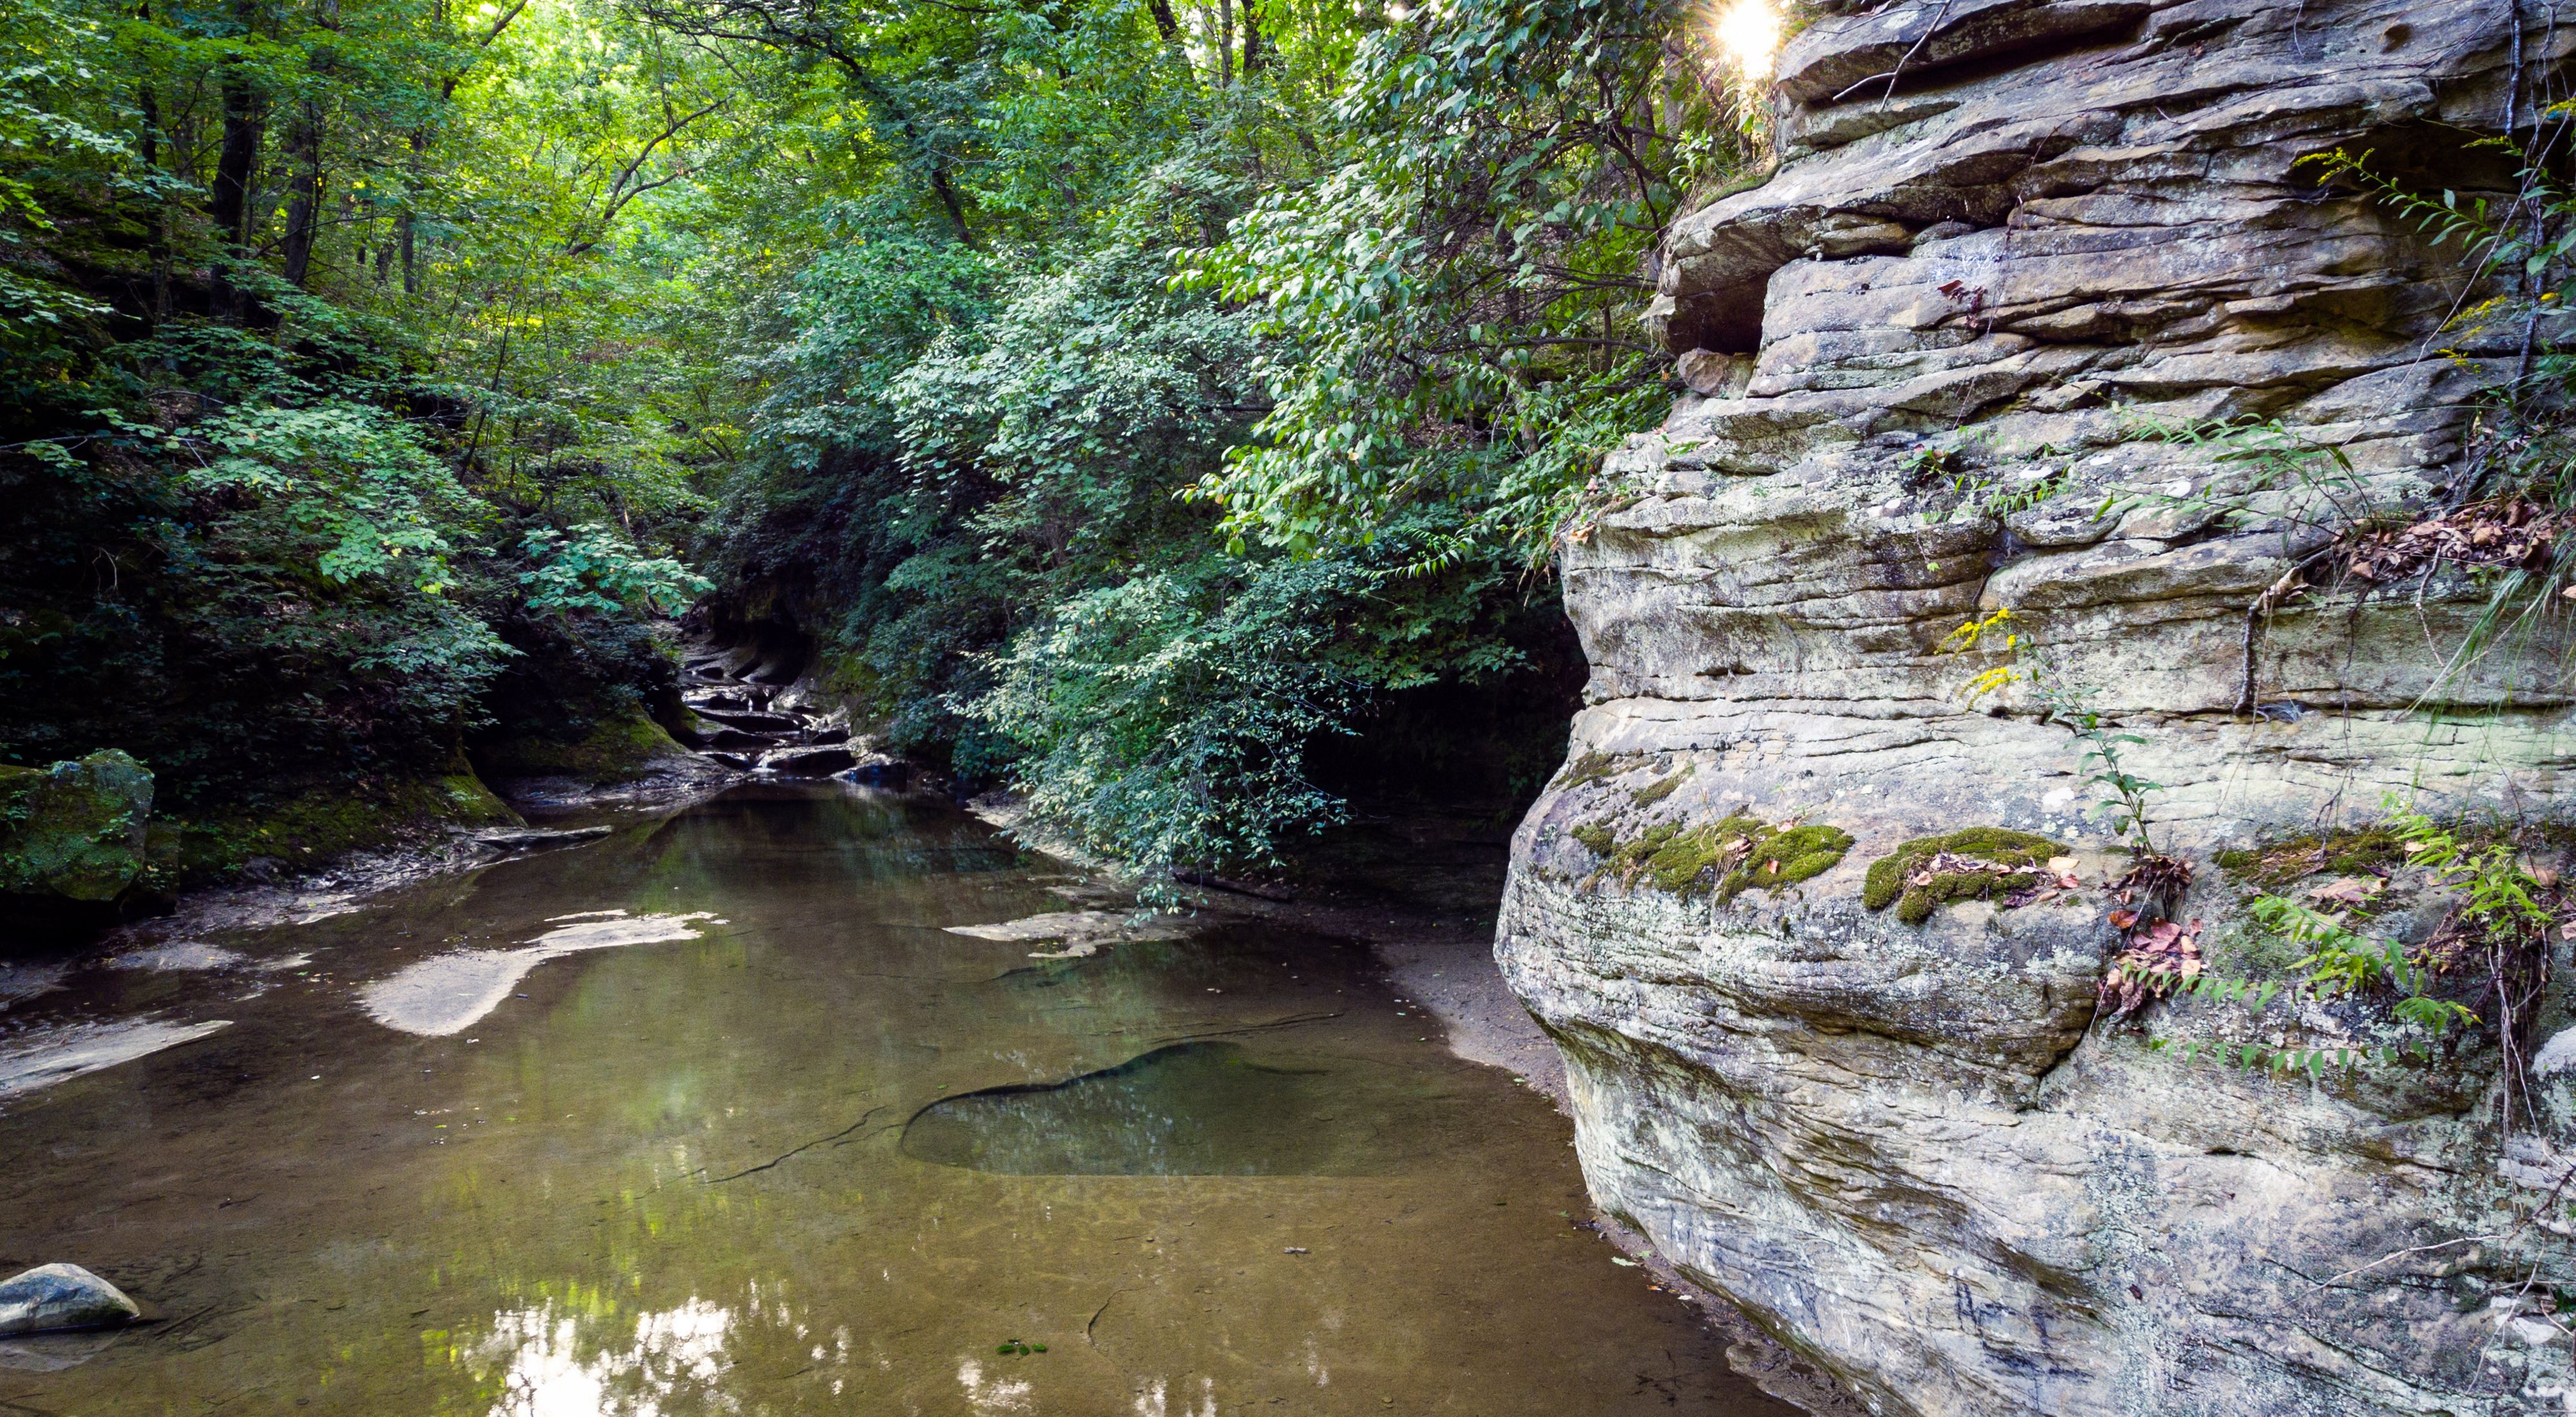 Shallow creek runs through rock formations in green forest.